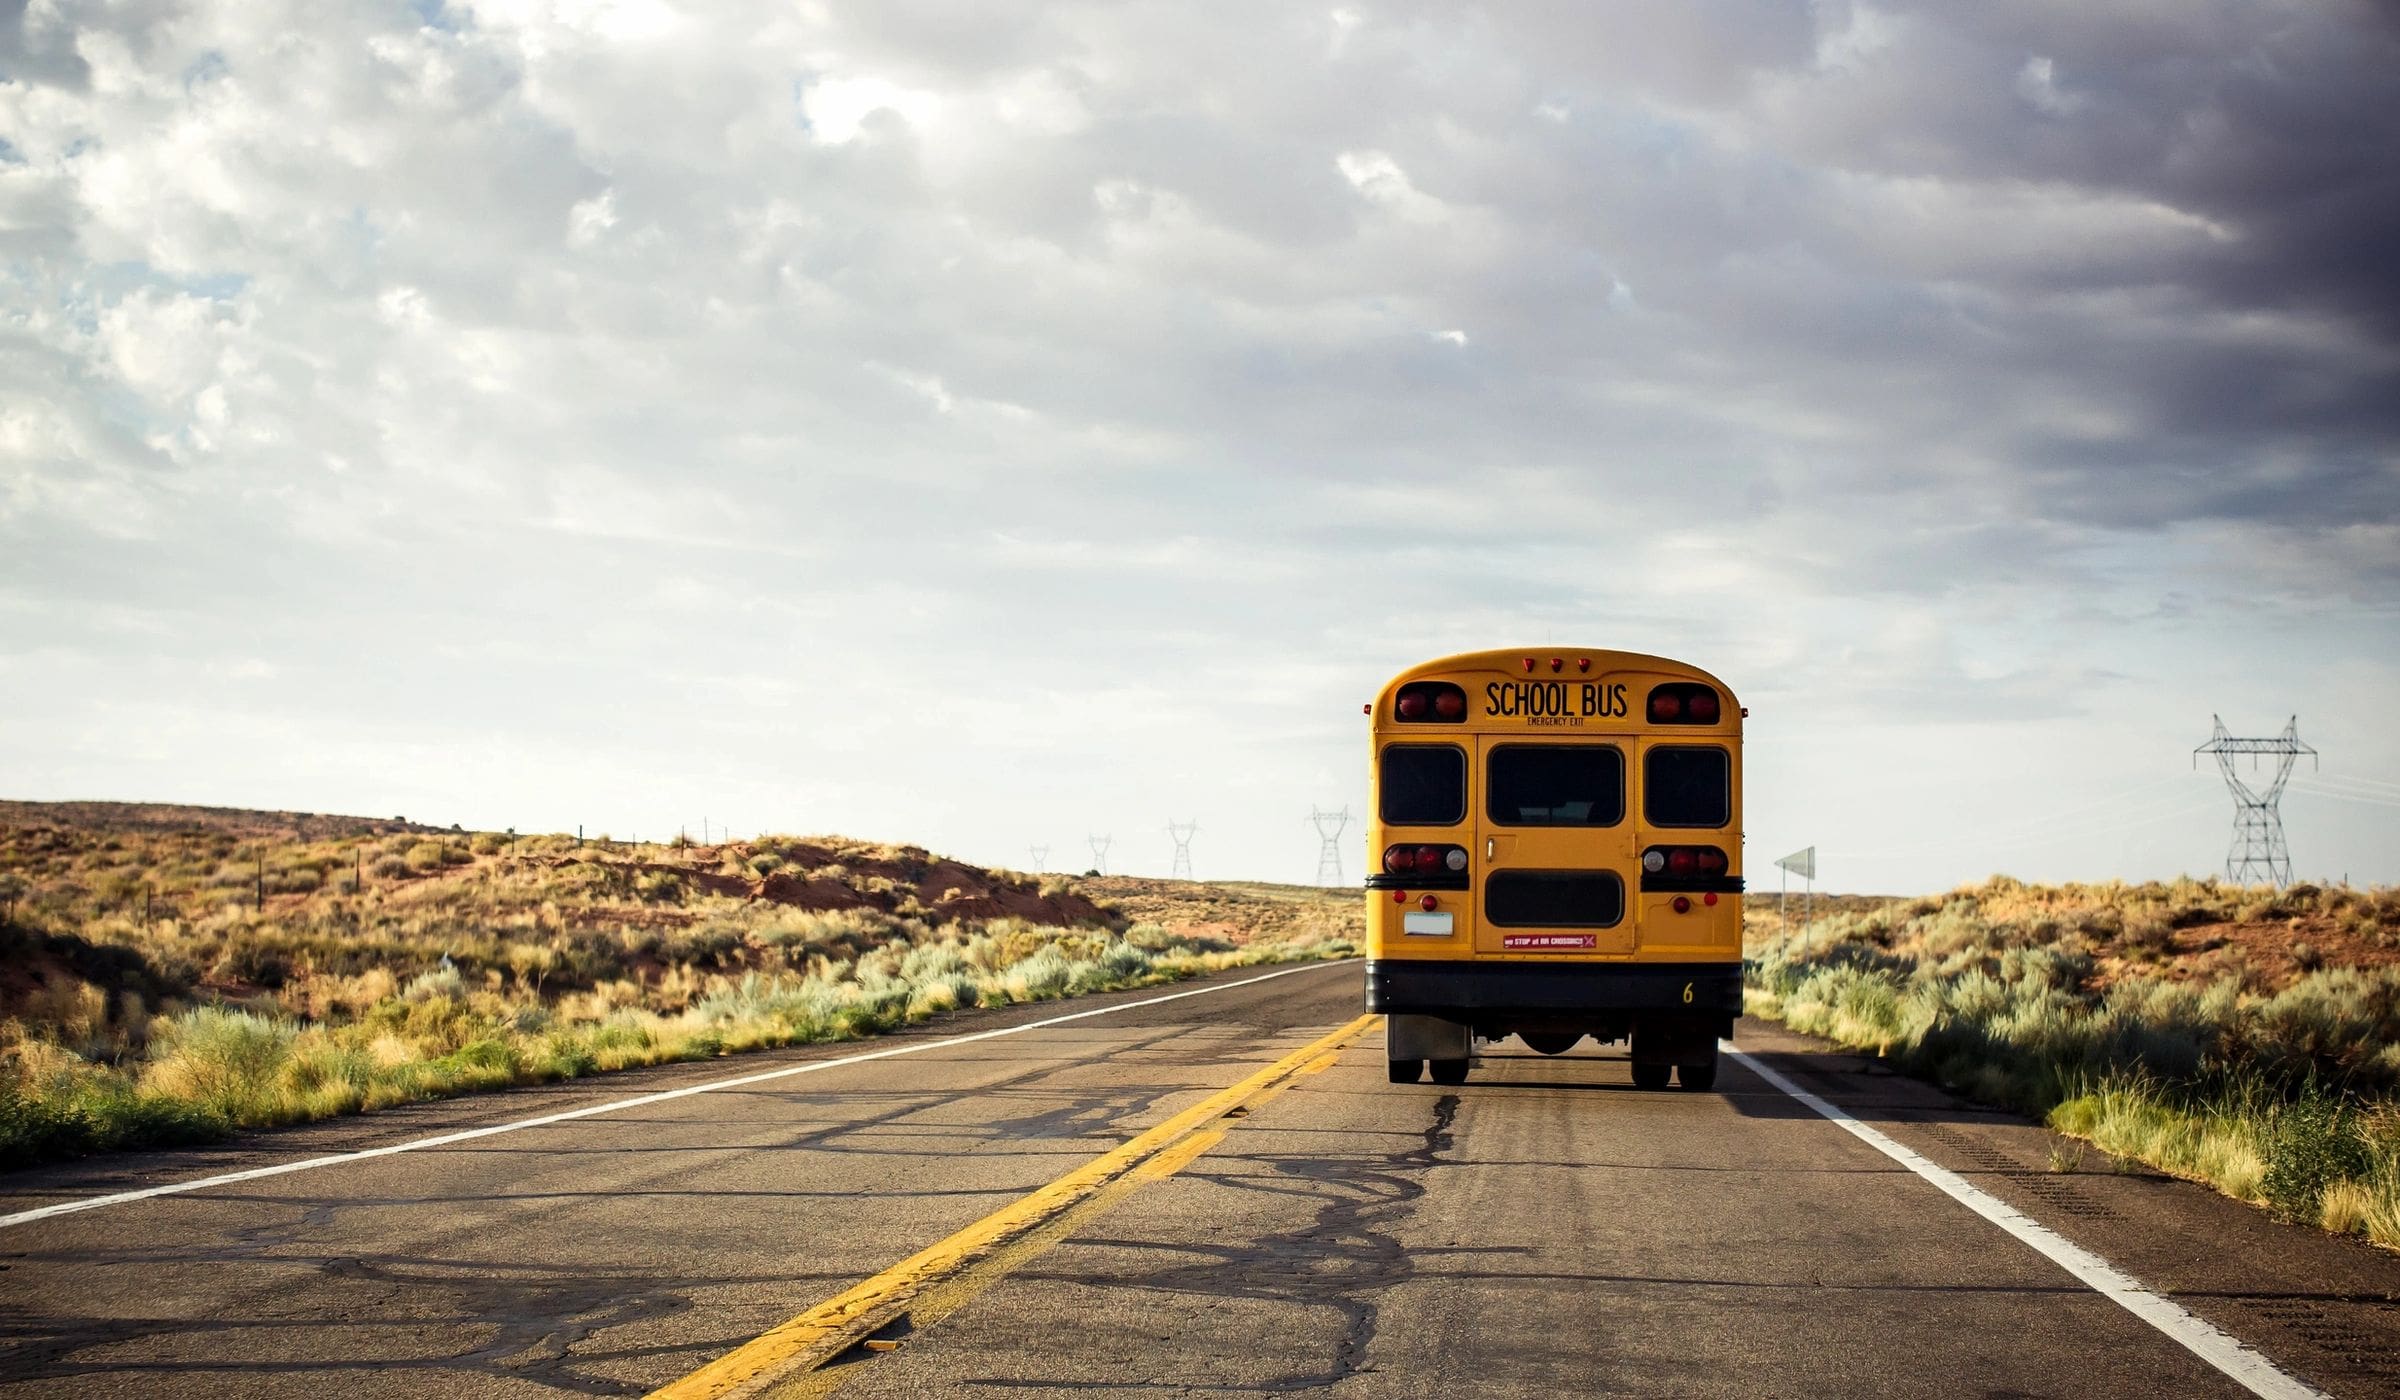 The rear end of a school bus driving on a rural road.